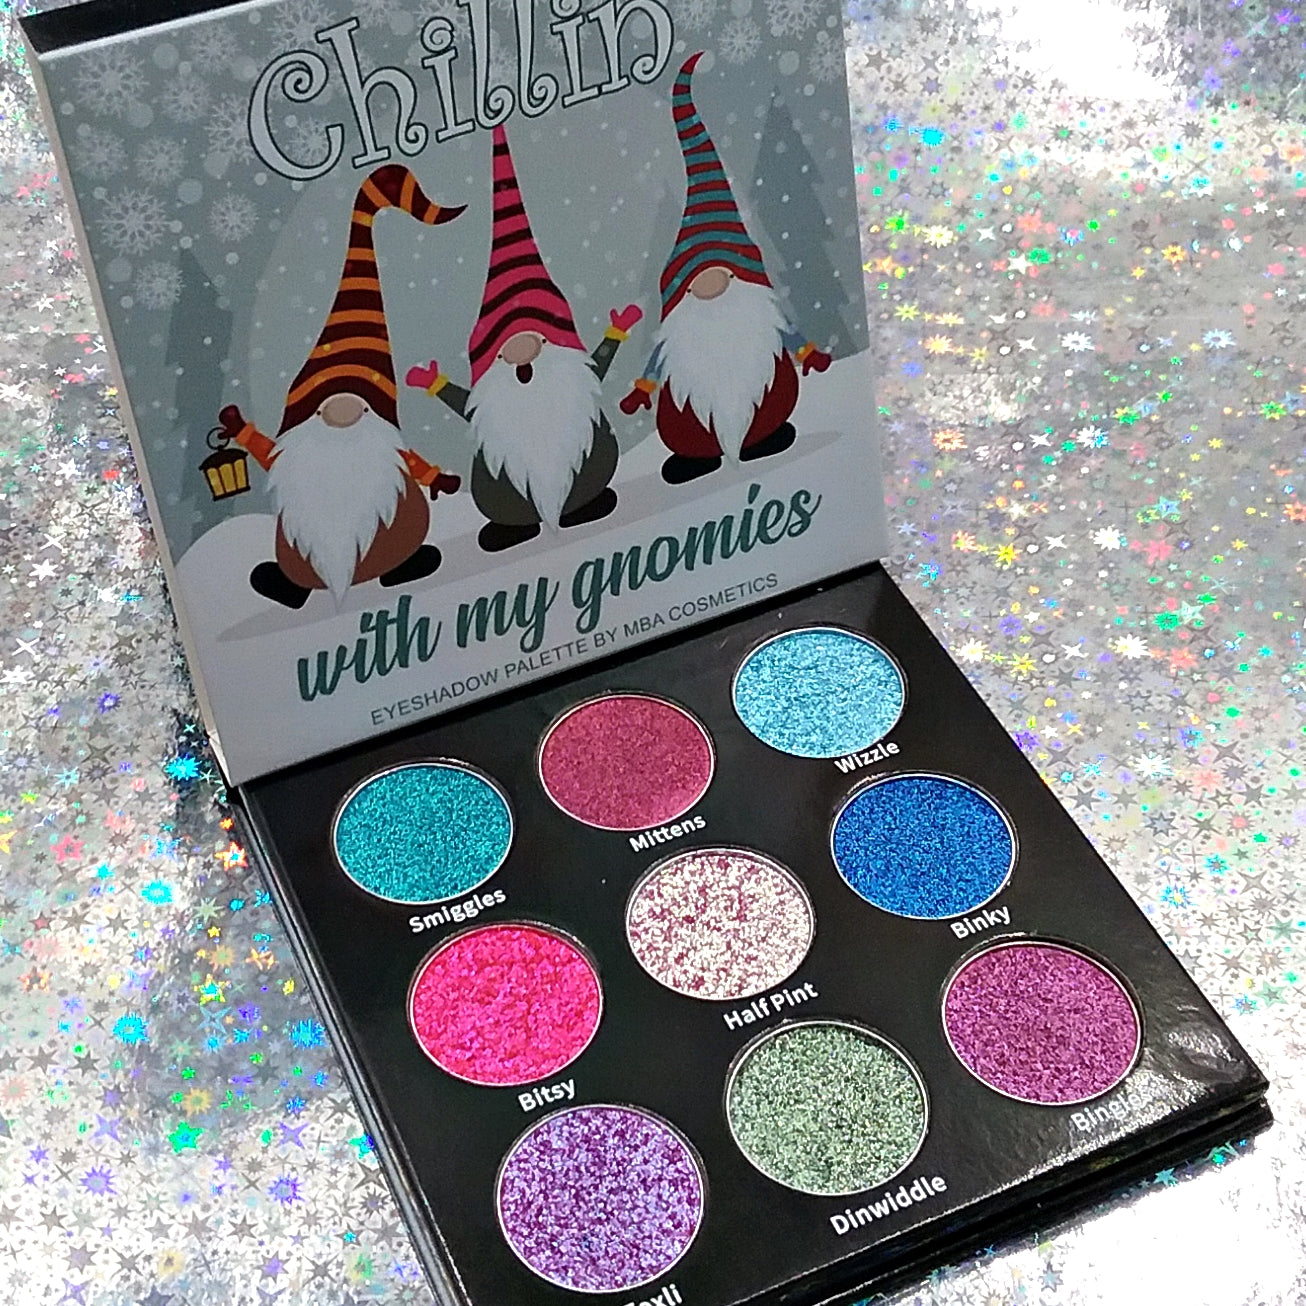 Chillin' With My Gnomies-Duochrome Eyeshadow Palette